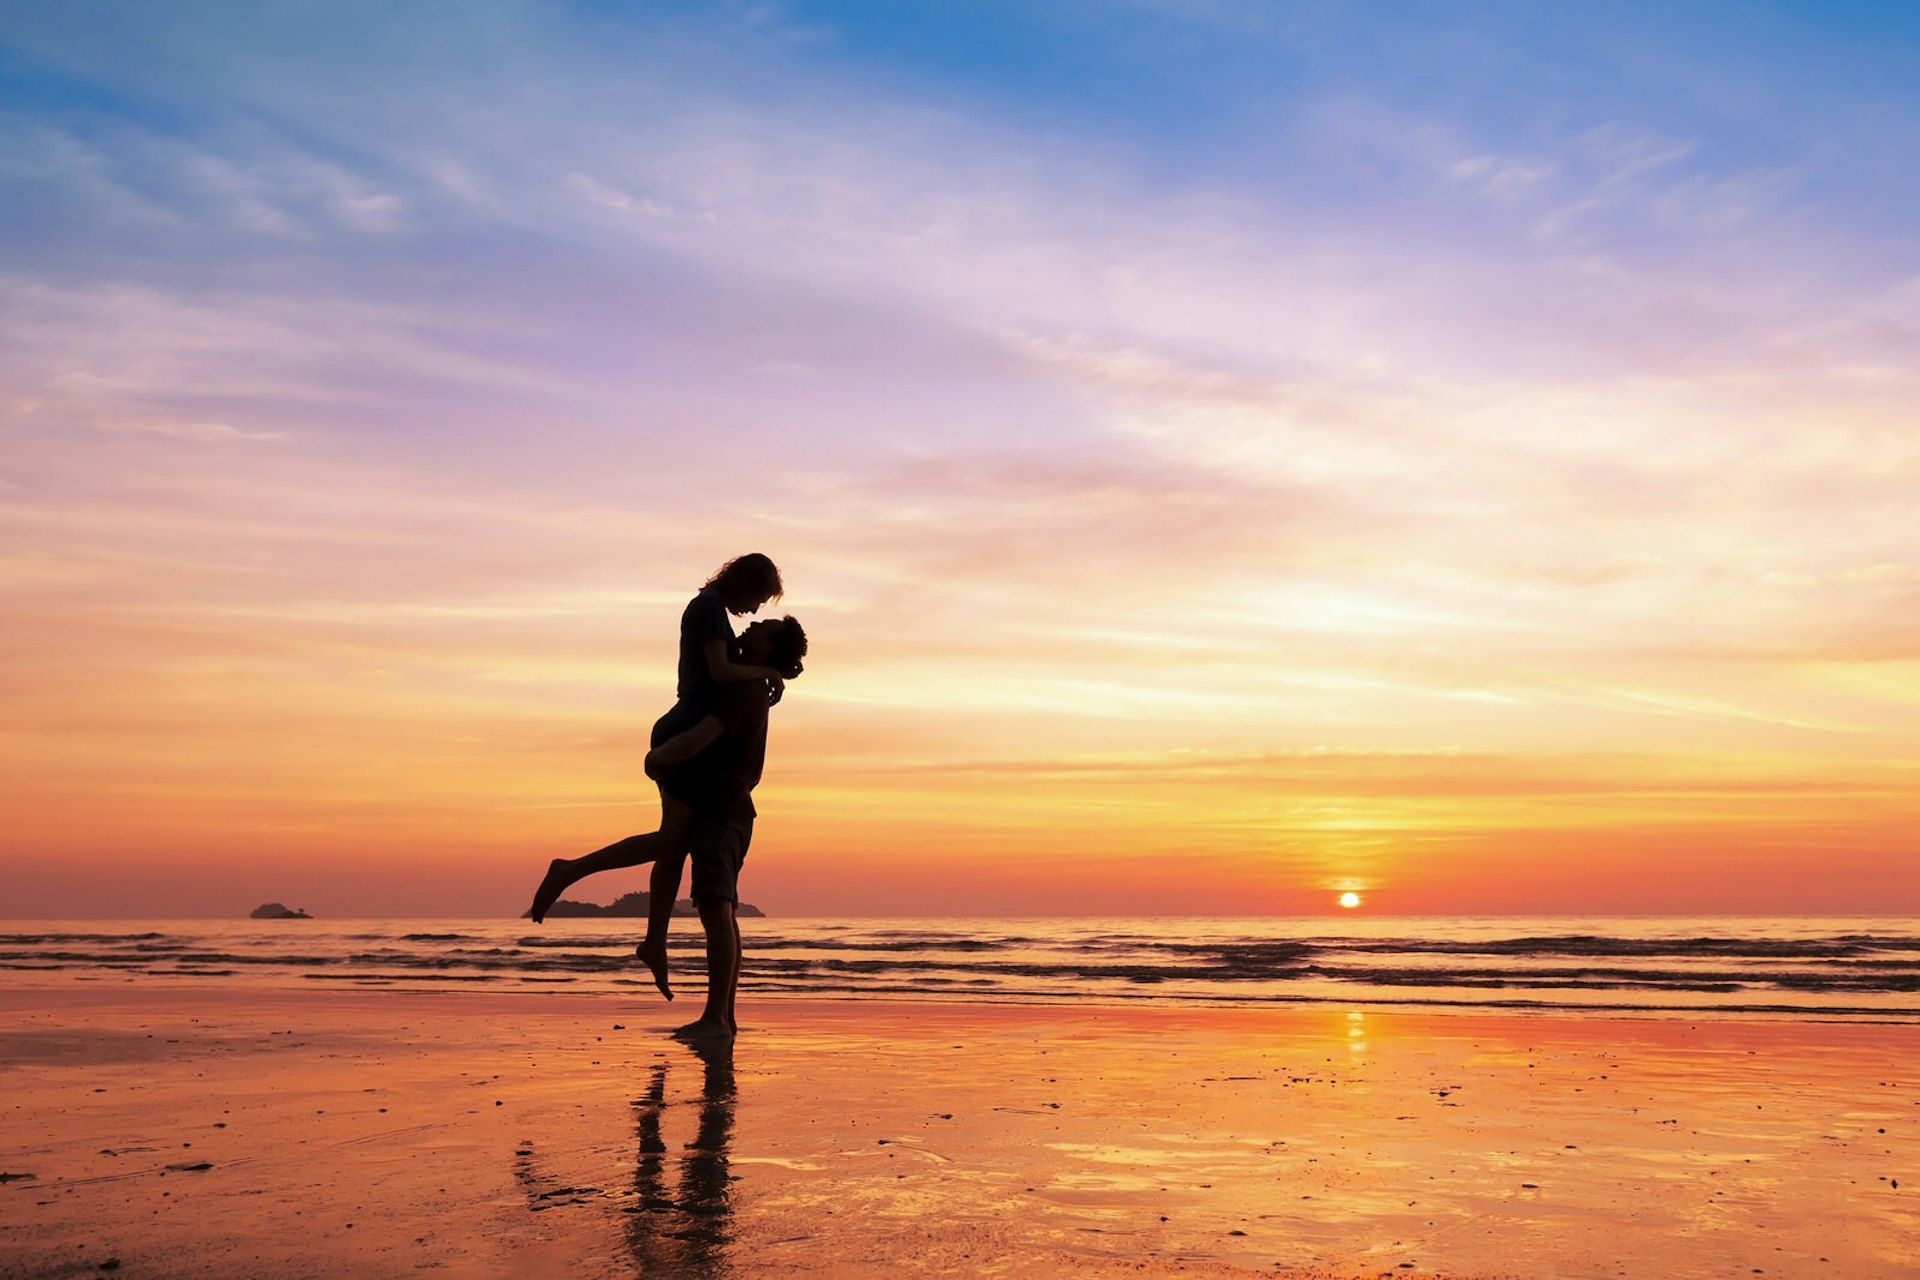 Travel predictions for 2018 - A silhouetted couple embrace on the beach at sunset © NicoElNino / Shutterstock